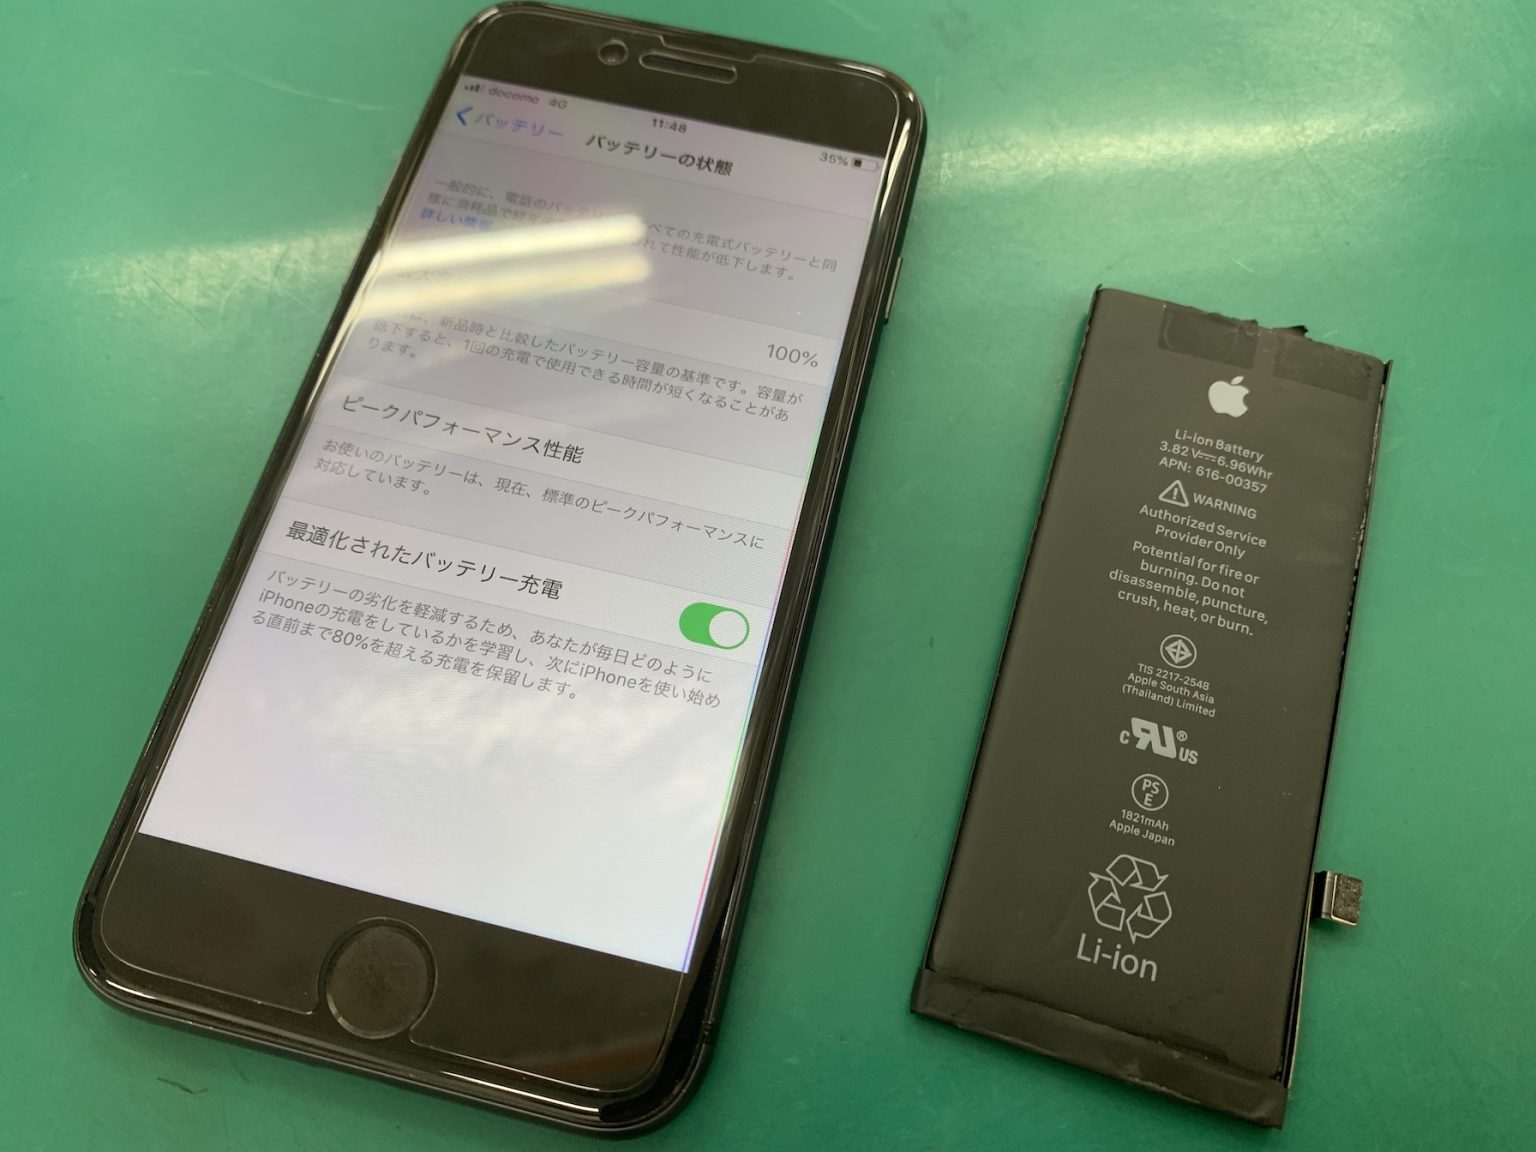 iPhone - iPhone8 64GB バッテリー残量88%の+stbp.com.br